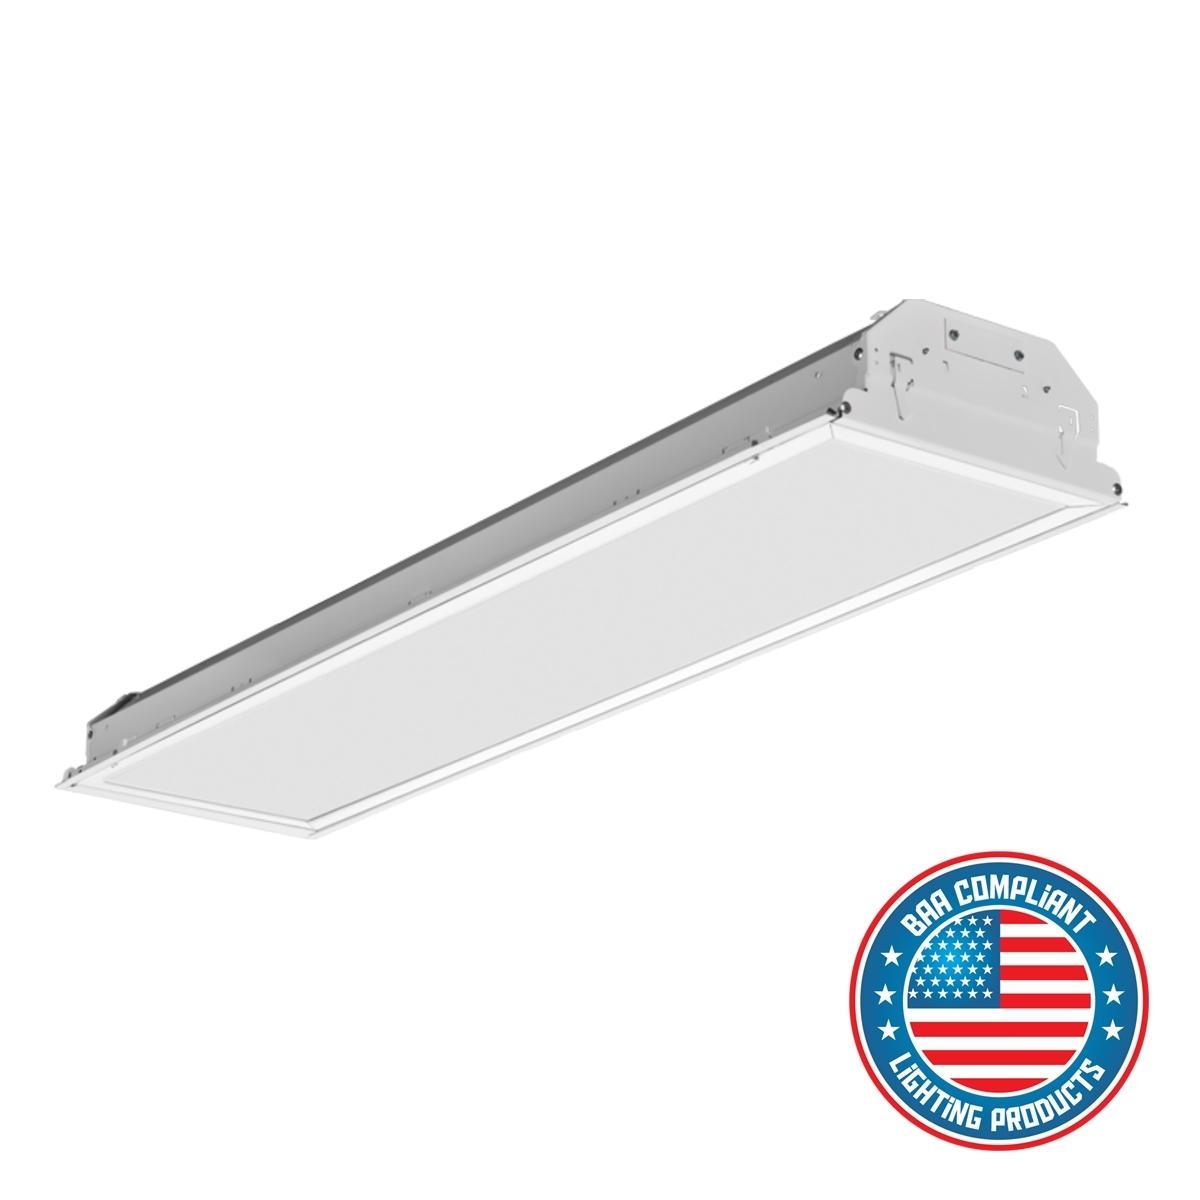 Lithonia Lighting BLT Series 2X4 34 Watt Low Profile Recessed LED Troffer  Light Fixture 4000 Lumens (Pallet Discount Also Available)